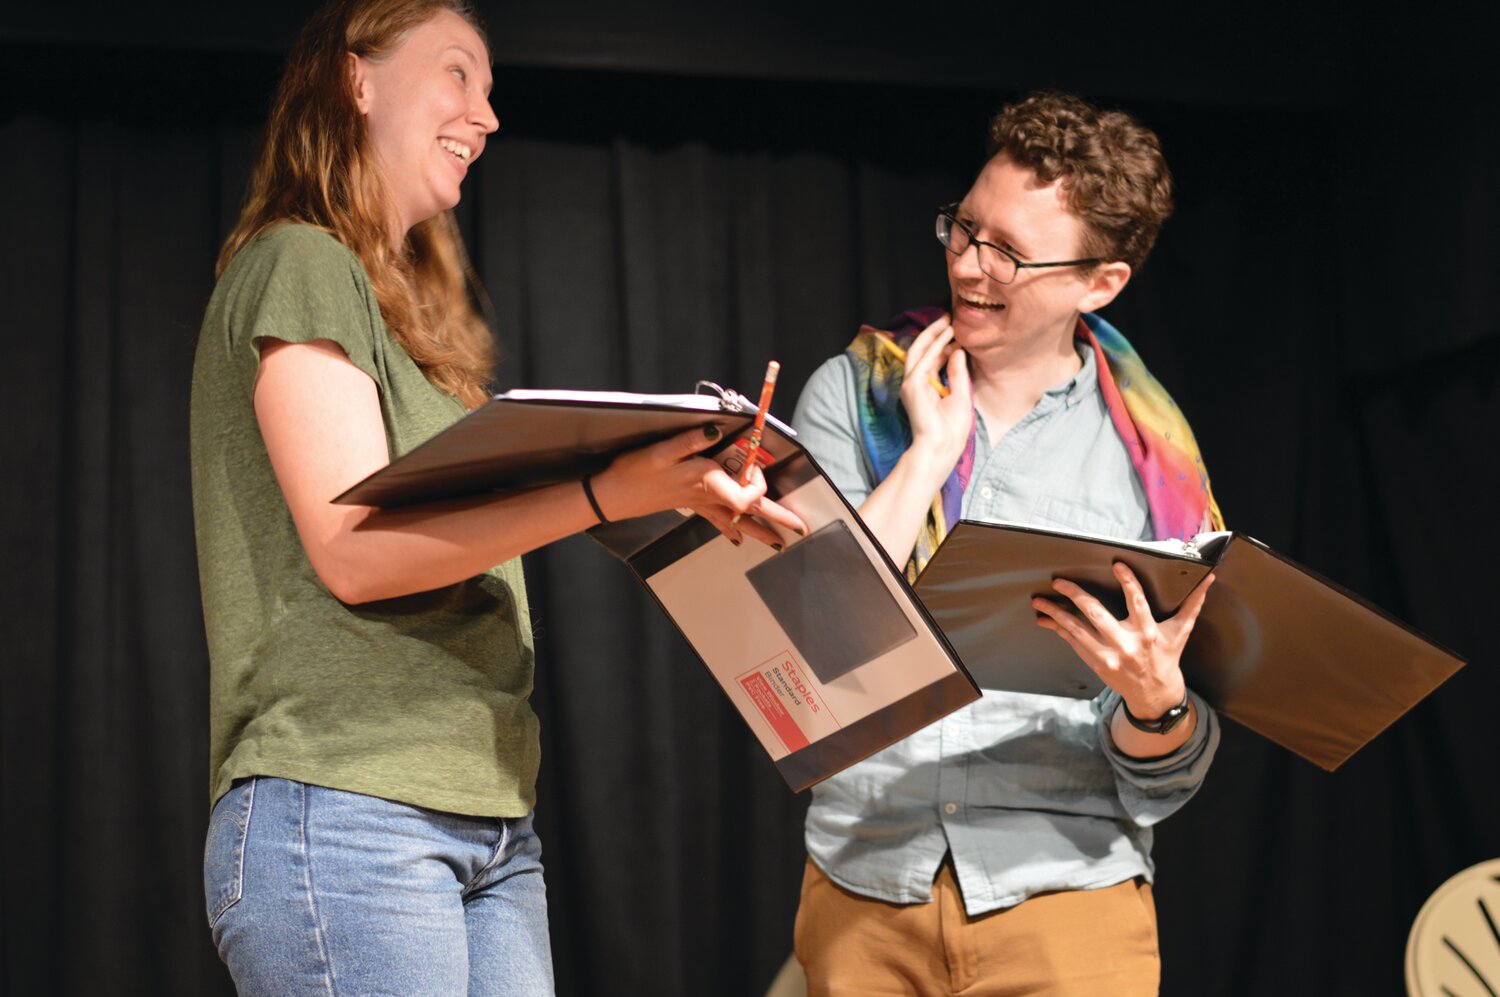 Holding scripts are Caitrin McLean, left, and Warren Smith, who portrays Bert Savoy in the play.